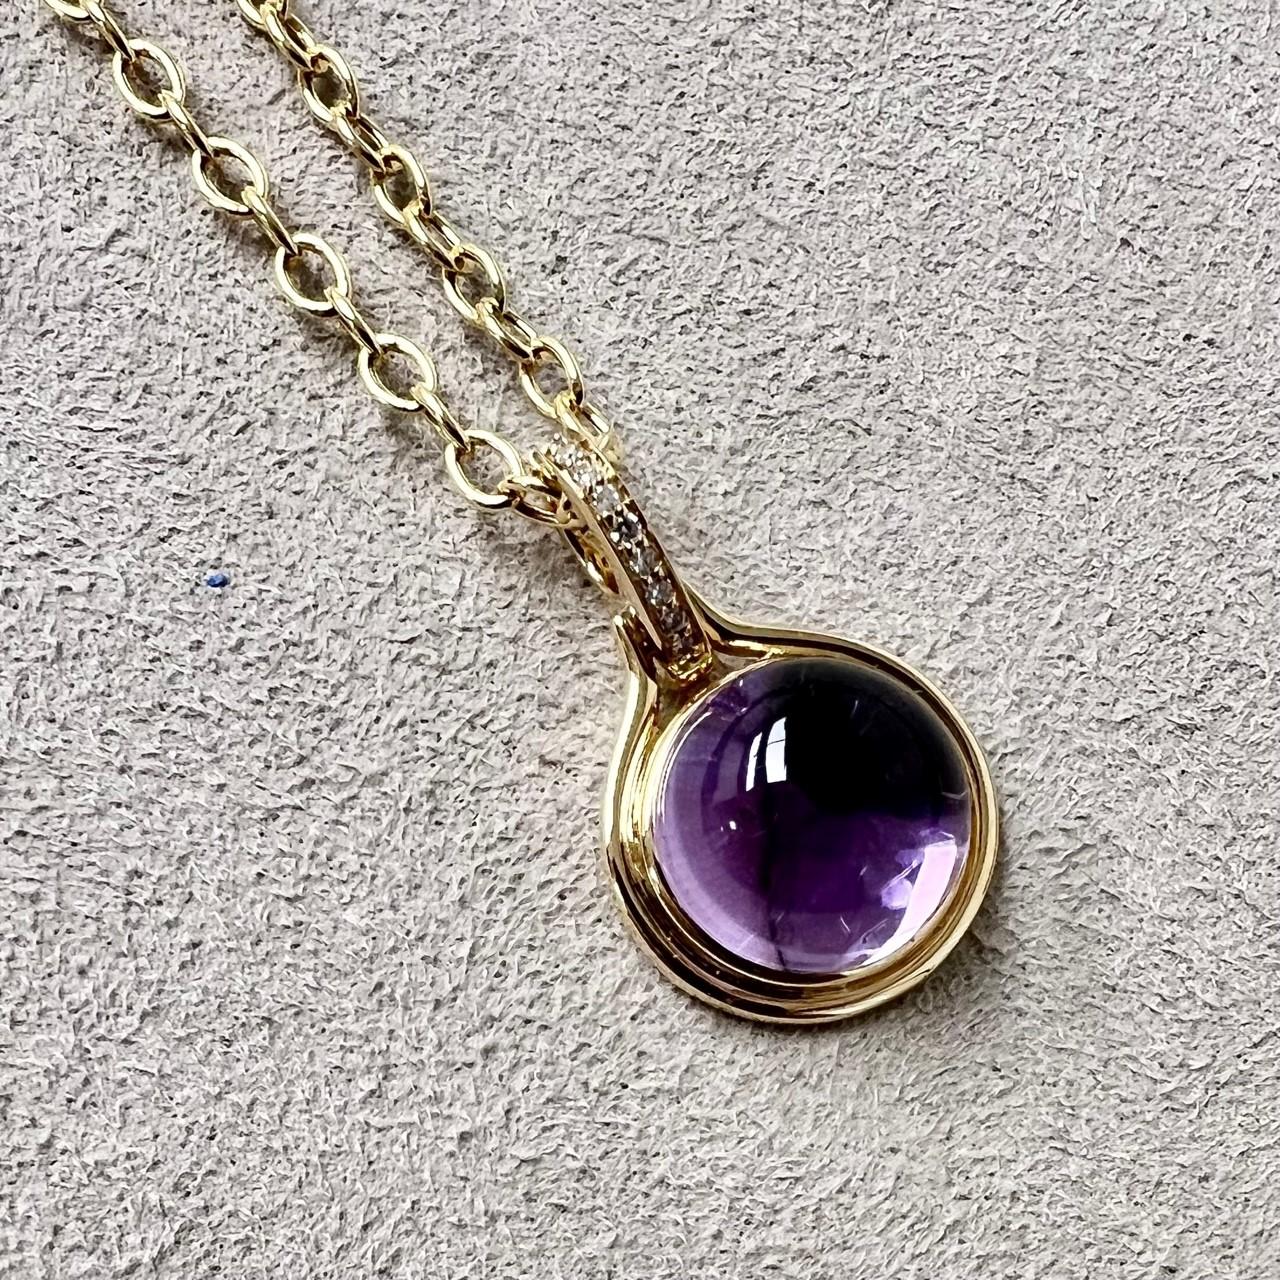 Created in 18 karat yellow gold
Amethyst 6 carats approx.
Champagne diamonds 0.05 carat approx.
Limited edition
Chain sold separately

 About the Designers ~ Dharmesh & Namrata

Drawing inspiration from little things, Dharmesh & Namrata Kothari have